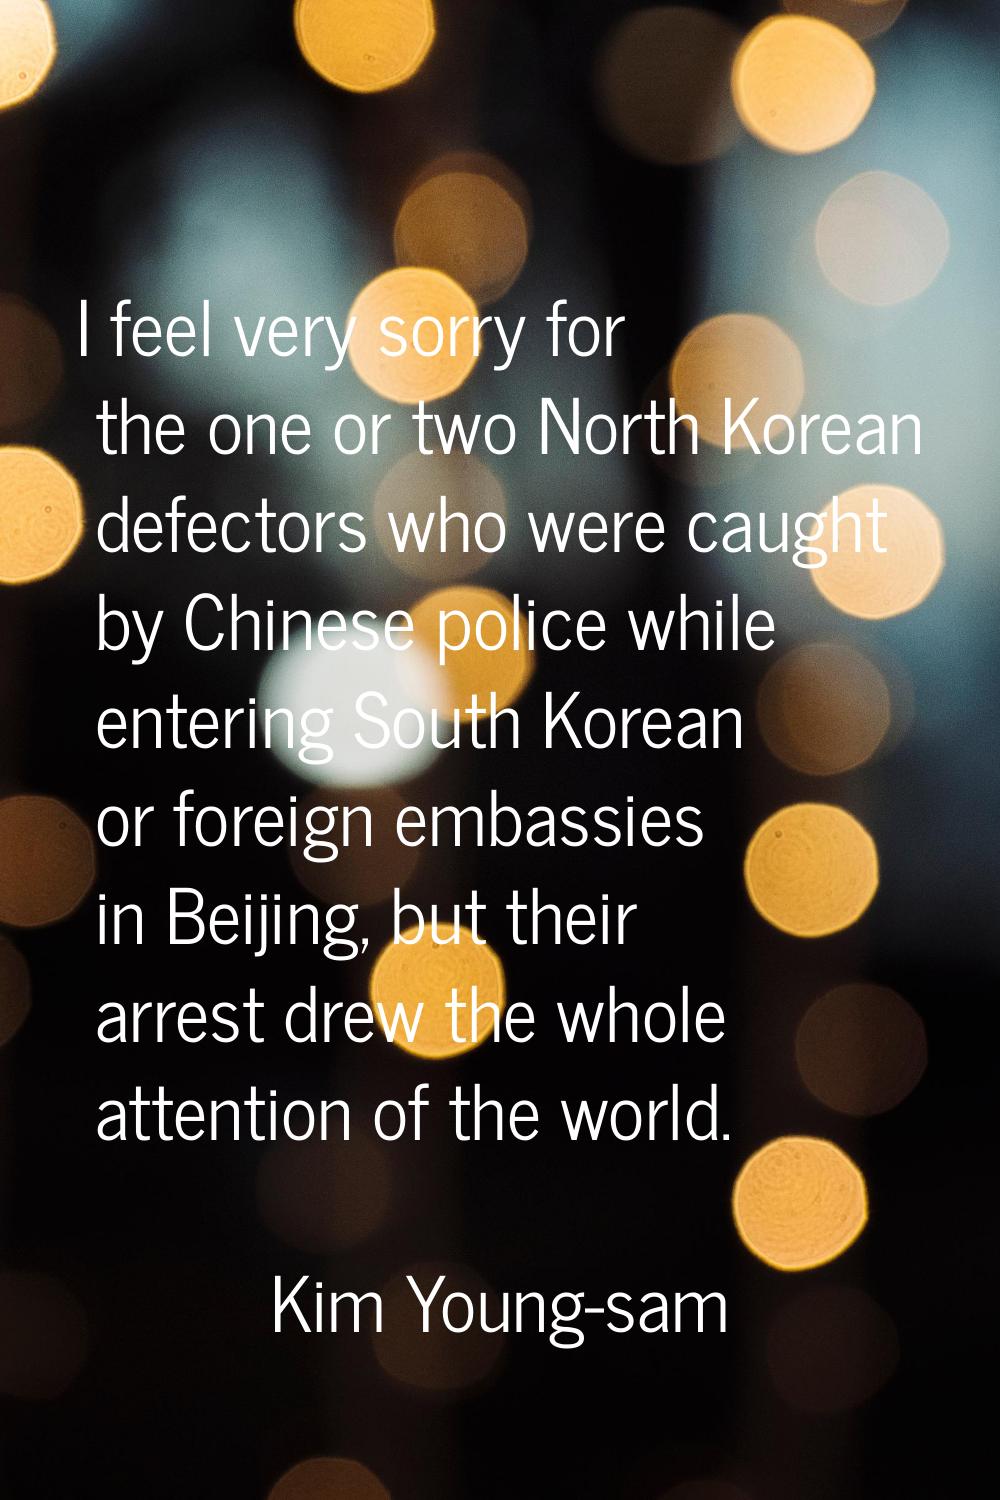 I feel very sorry for the one or two North Korean defectors who were caught by Chinese police while